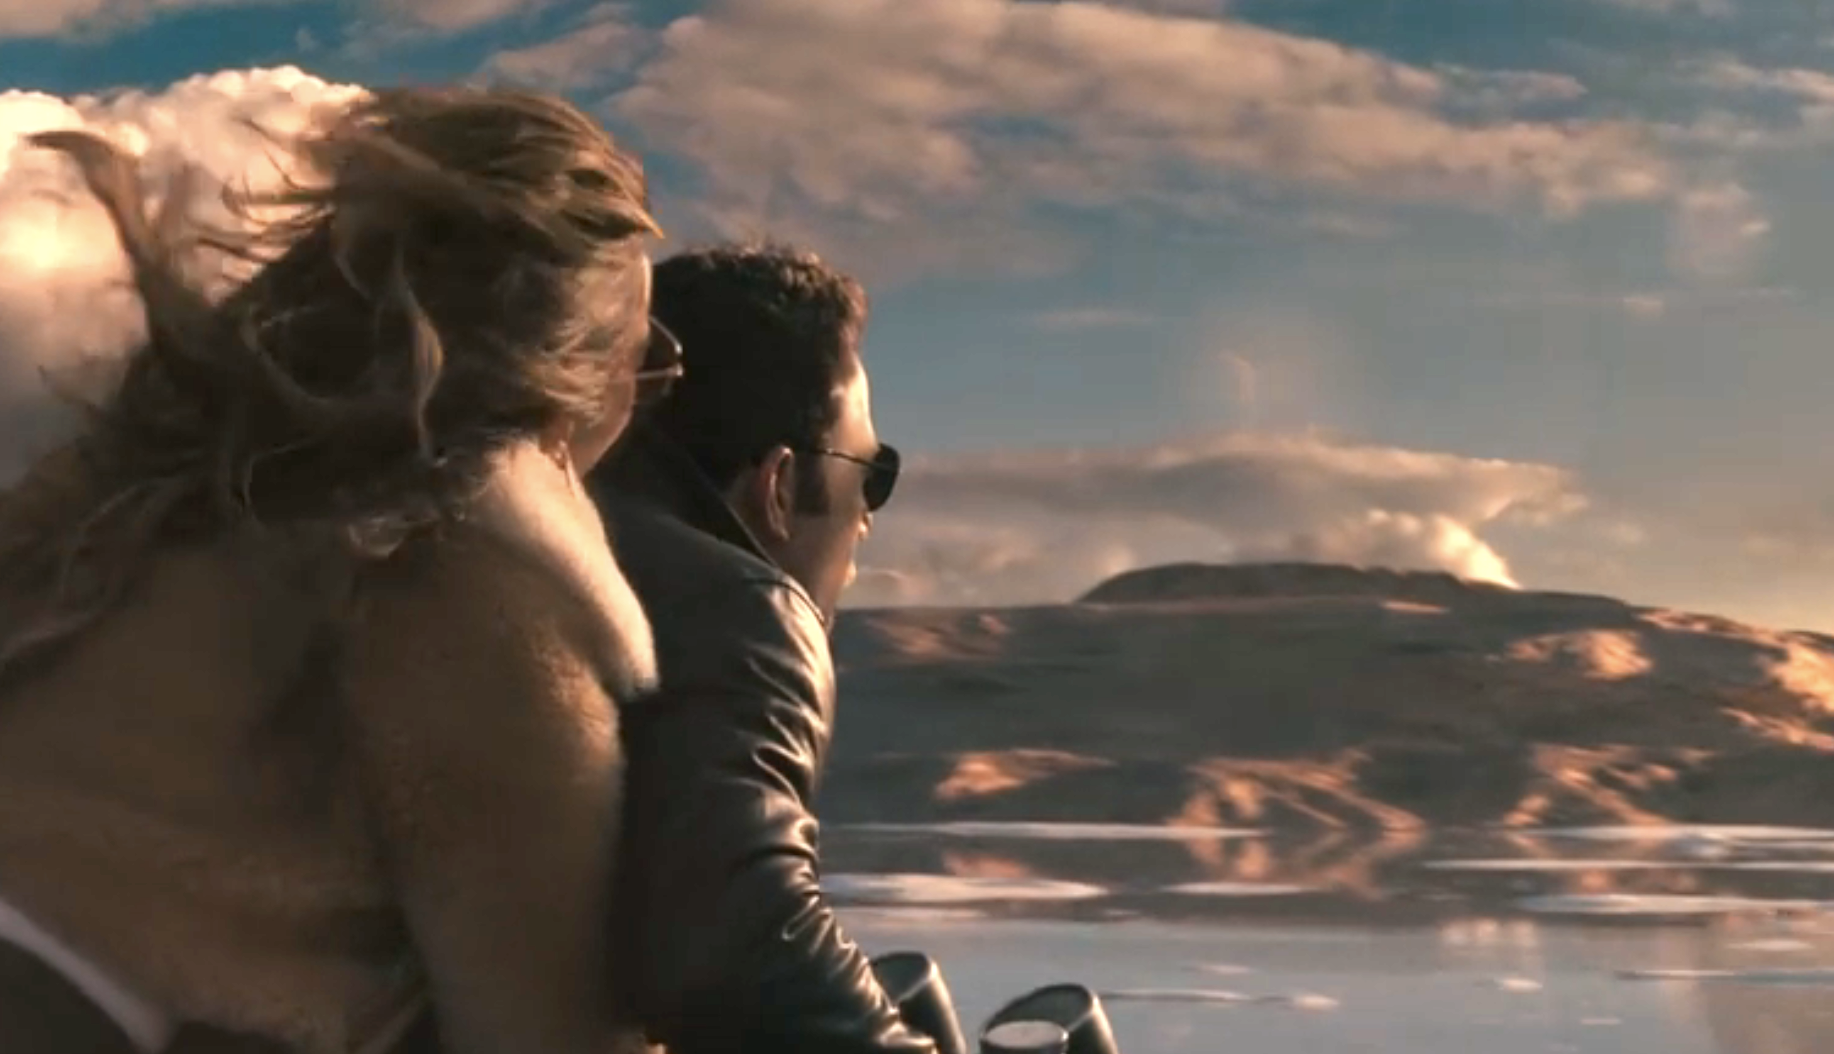 j.lo and ben riding off in a motorcycle